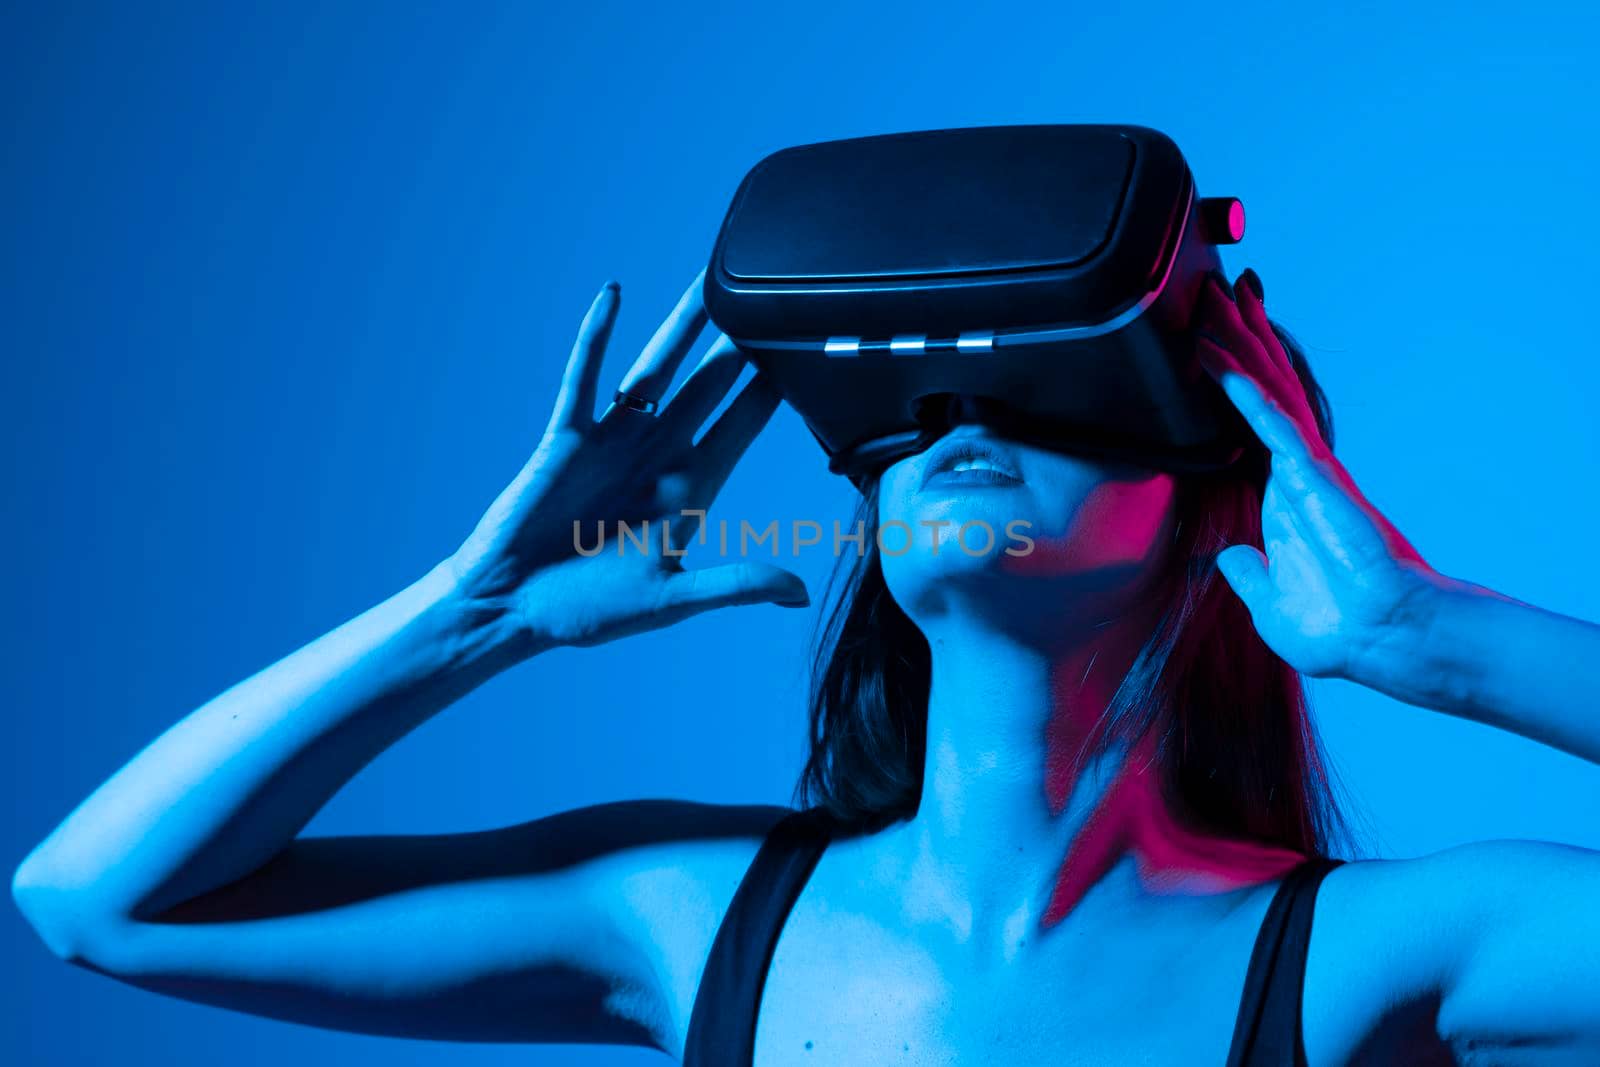 Woman enjoying a VR experience. Woman with VR headset touching invisible screen. Future technology concept